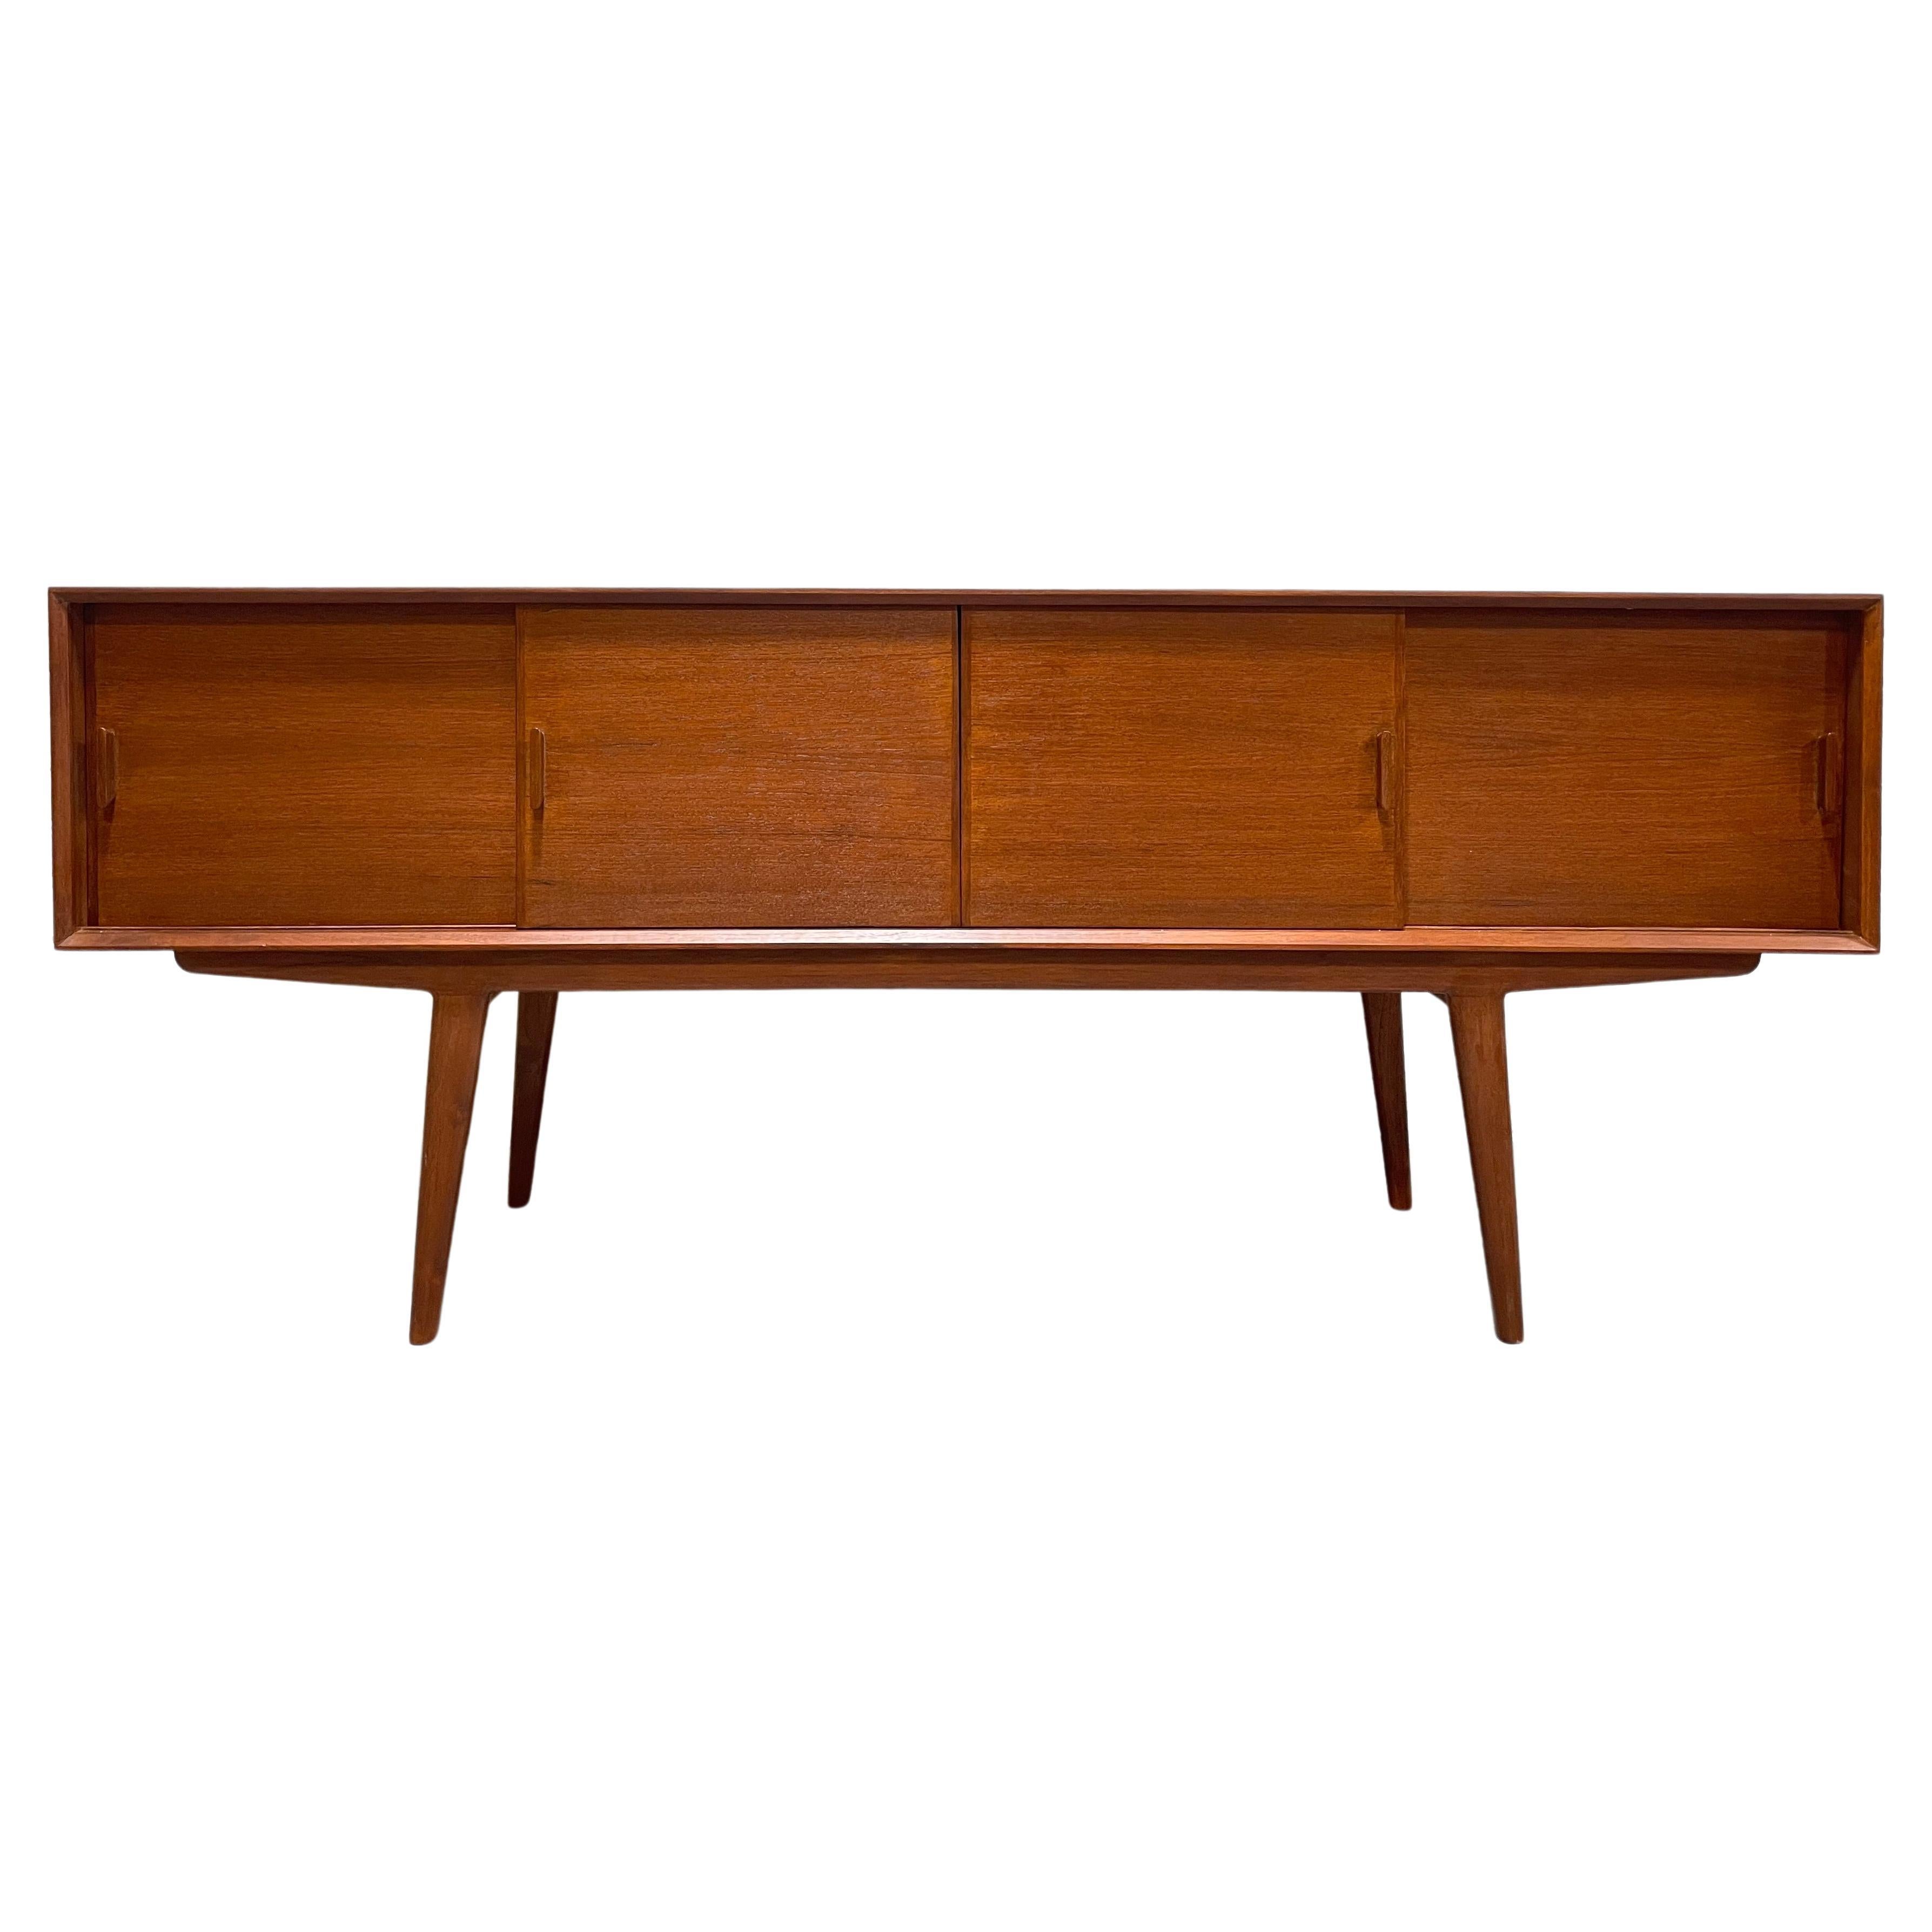 Handmade Long + Sleek Mid century styled Modern credenza / media stand with the most gorgeous wood grains. Perfect layout for a media stand or vinyl storage - generous shelving for components paired with extra long tapered Danish style legs. Each